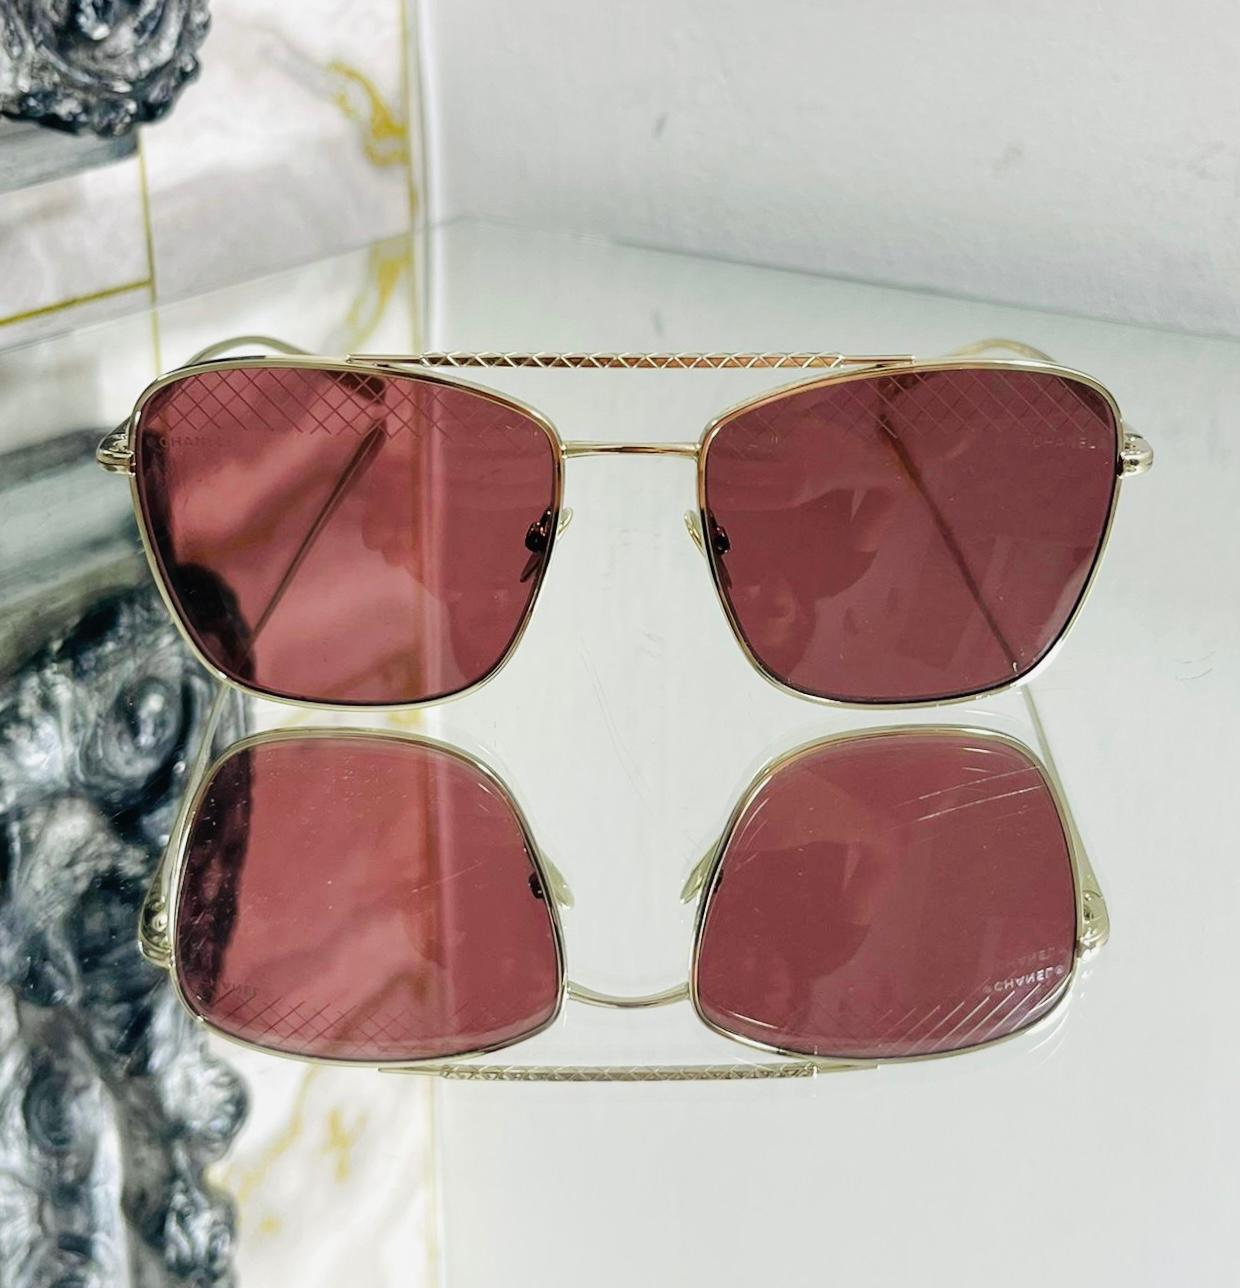 Chanel Pilot Sunglasses

Gold framed aviator sunglasses designed with pale burgundy lenses.

Detailed with 'CC' logo to the nose pads and embroidered top bar.

Featuring 100% UVA and UVB Protection CE - Lenses are UV Category Filter 1. 

Size – One